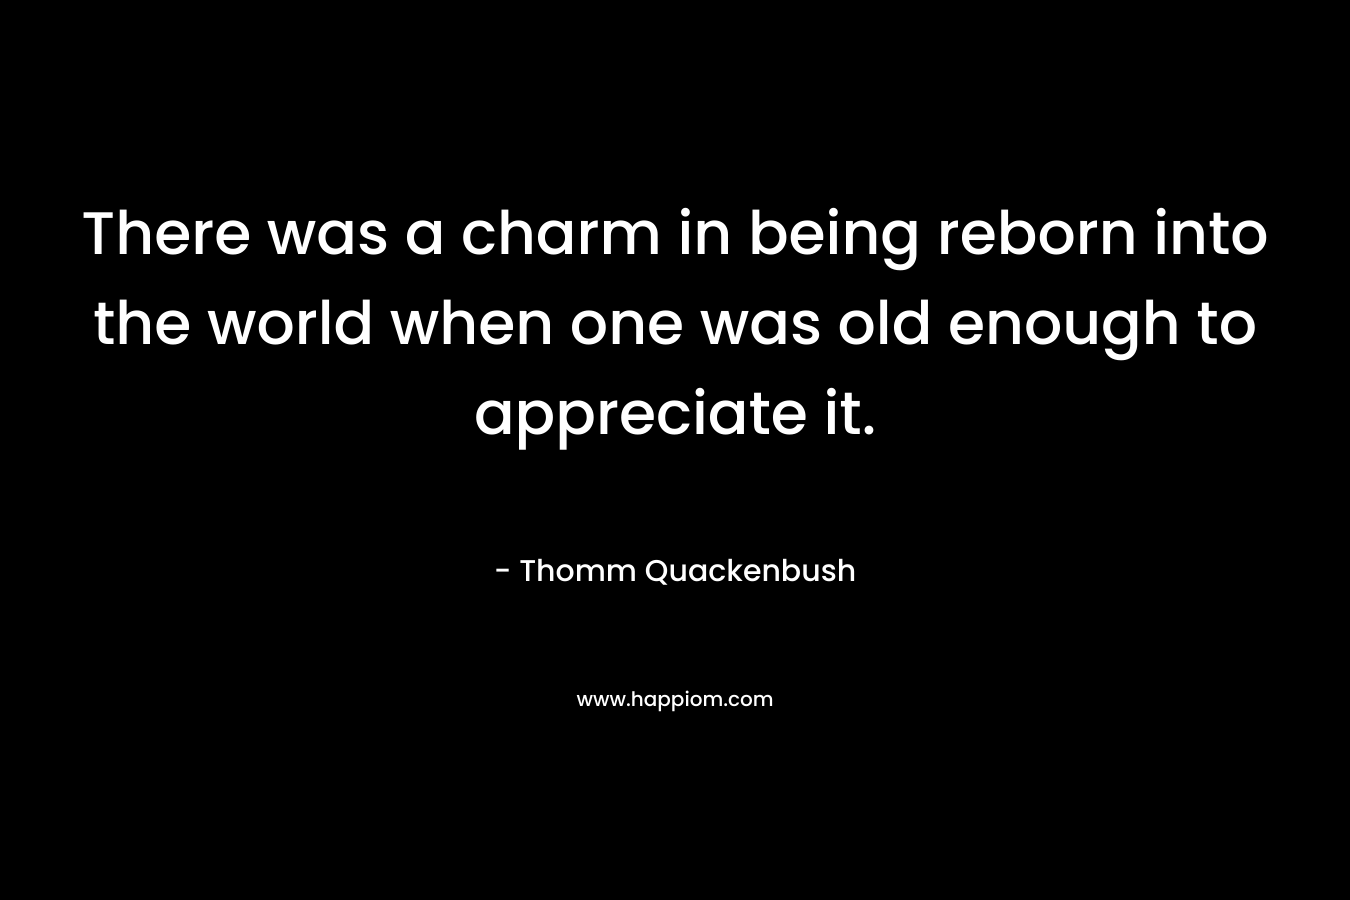 There was a charm in being reborn into the world when one was old enough to appreciate it. – Thomm Quackenbush